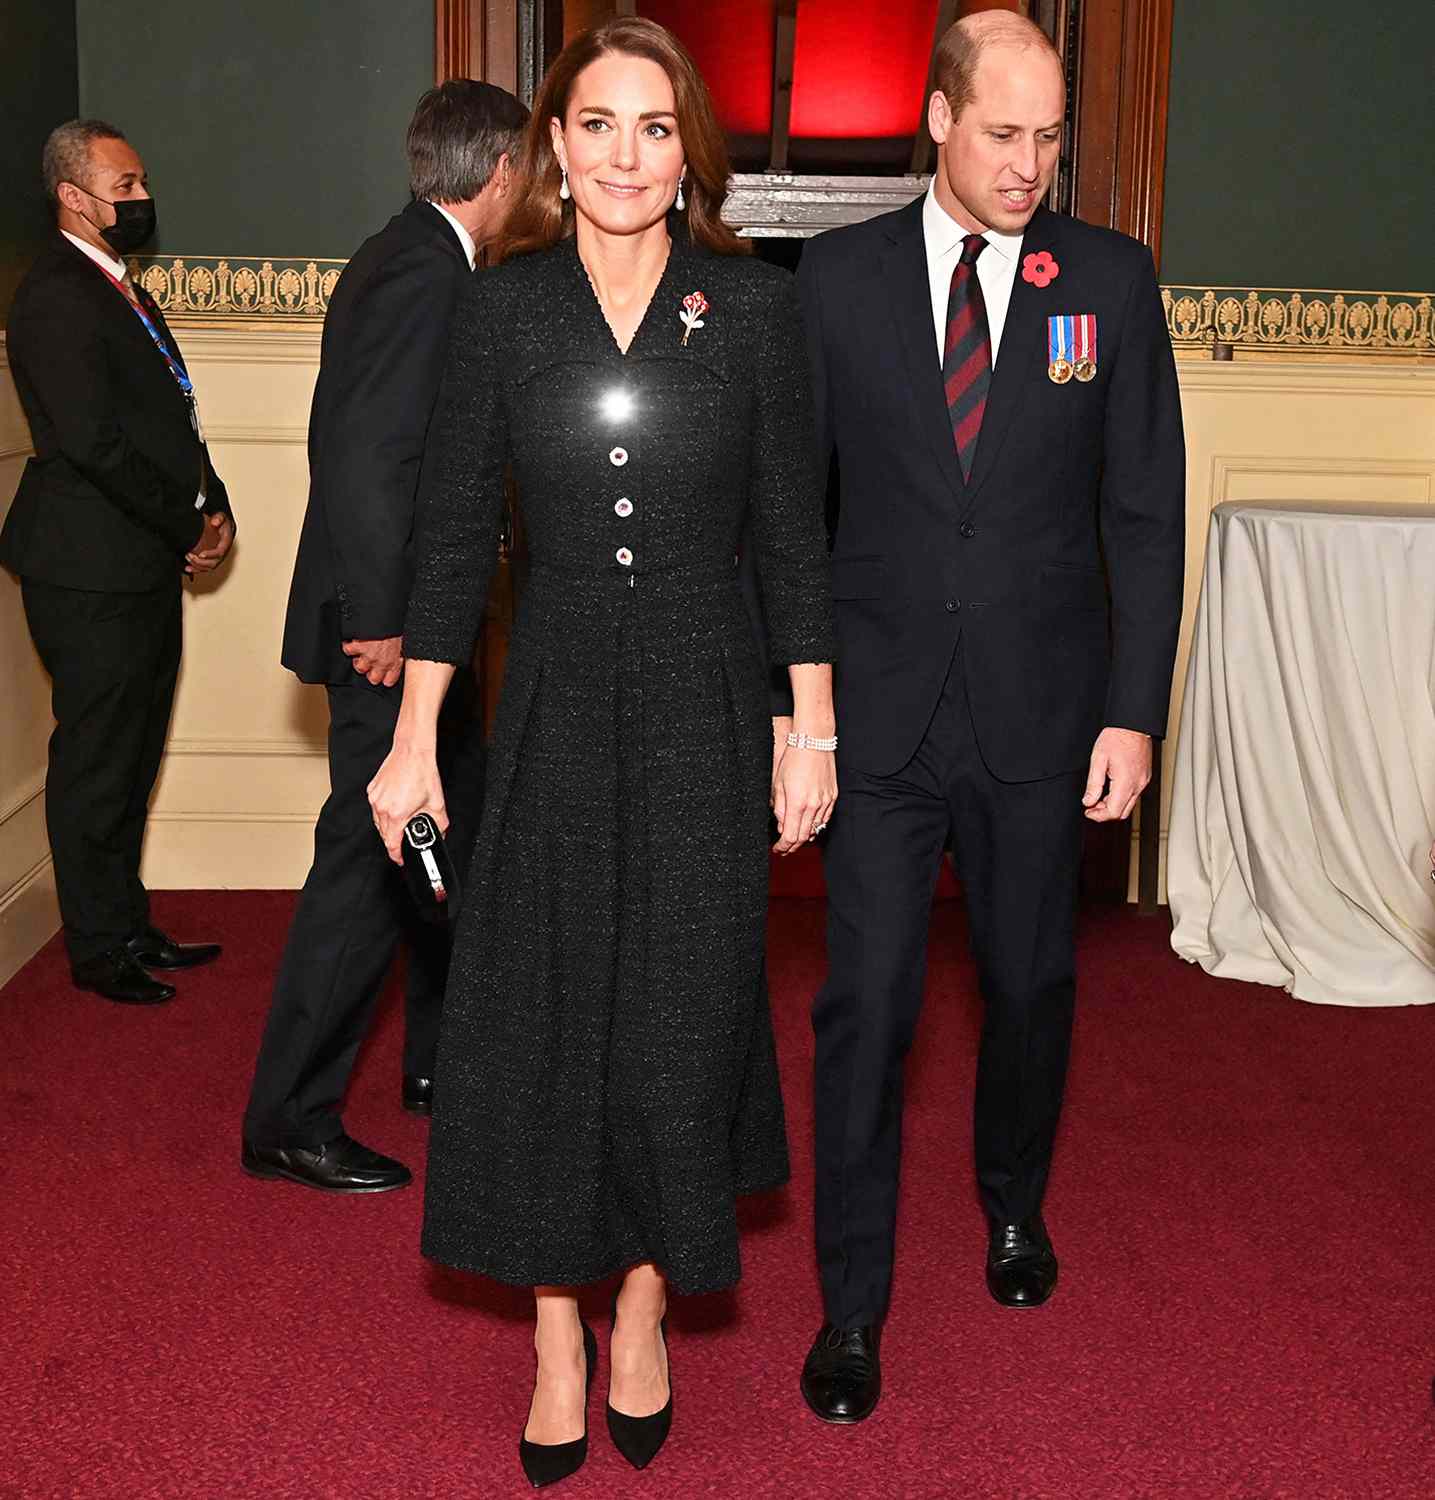 Britain's Prince William, Duke of Cambridge (2nd R) and Britain's Catherine, Duchess of Cambridge (C) arrive to attend the annual Royal British Legion Festival of Remembrance at the Royal Albert Hall in London on November 13, 2021.